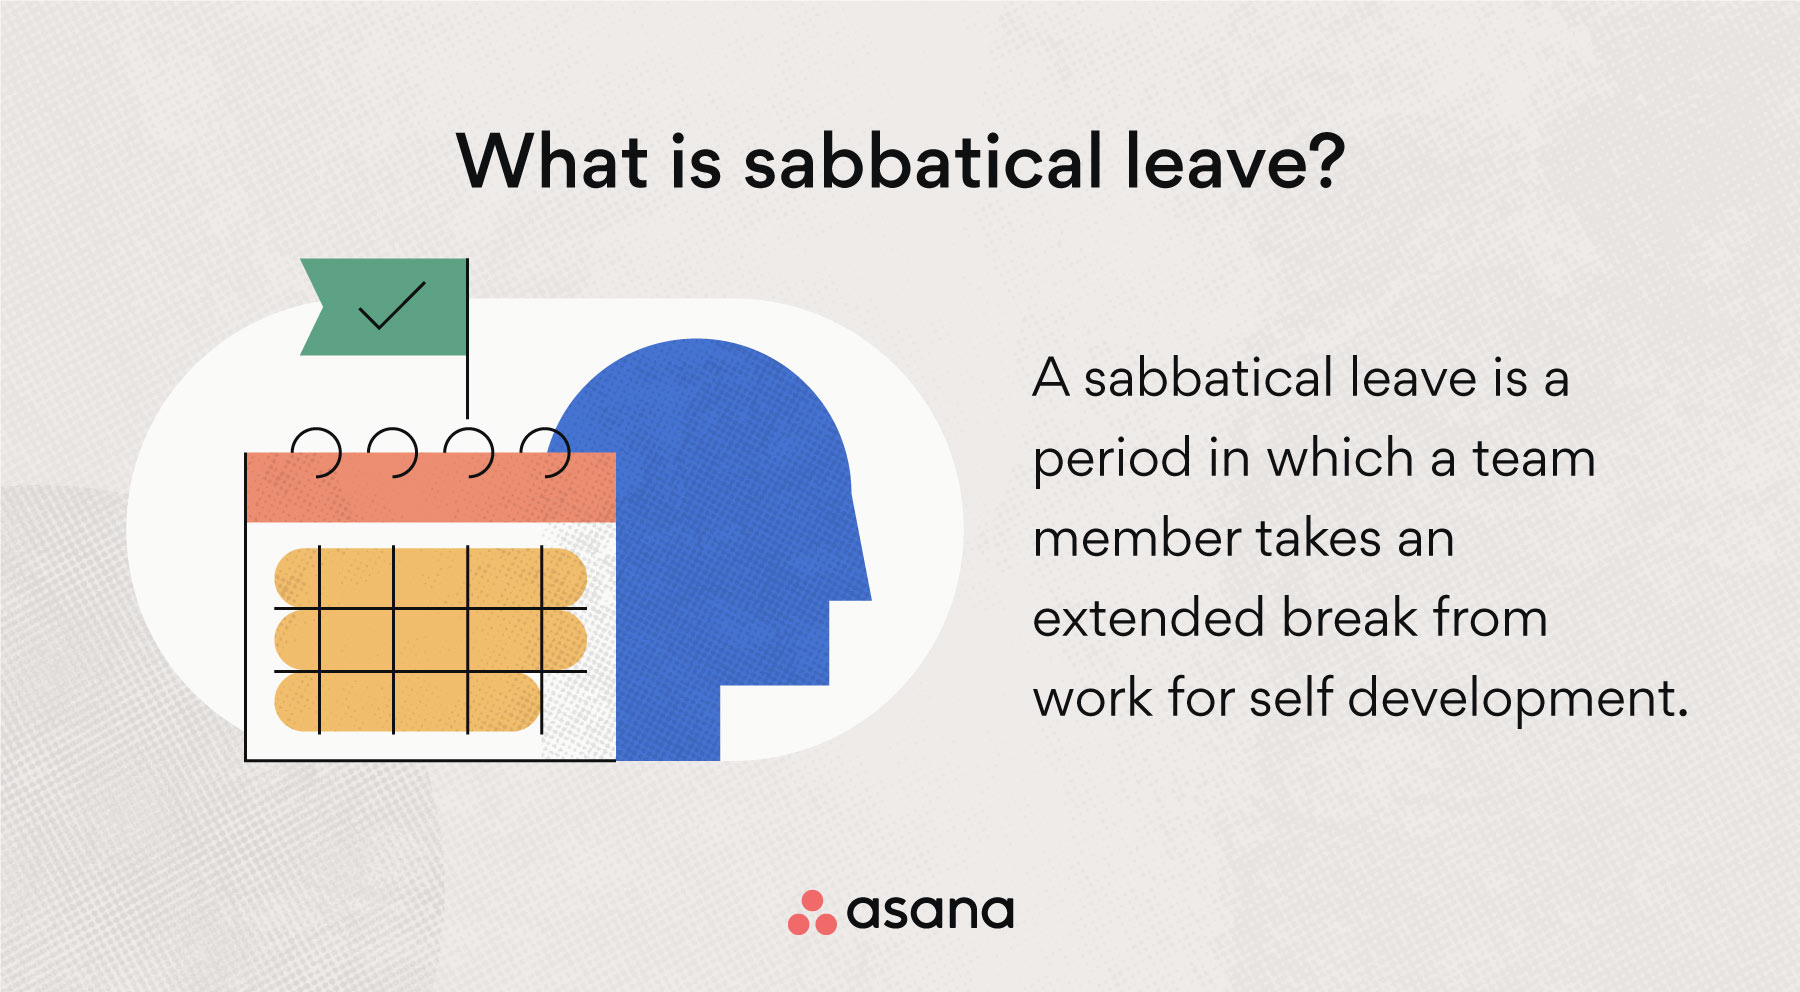 What is sabbatical leave?